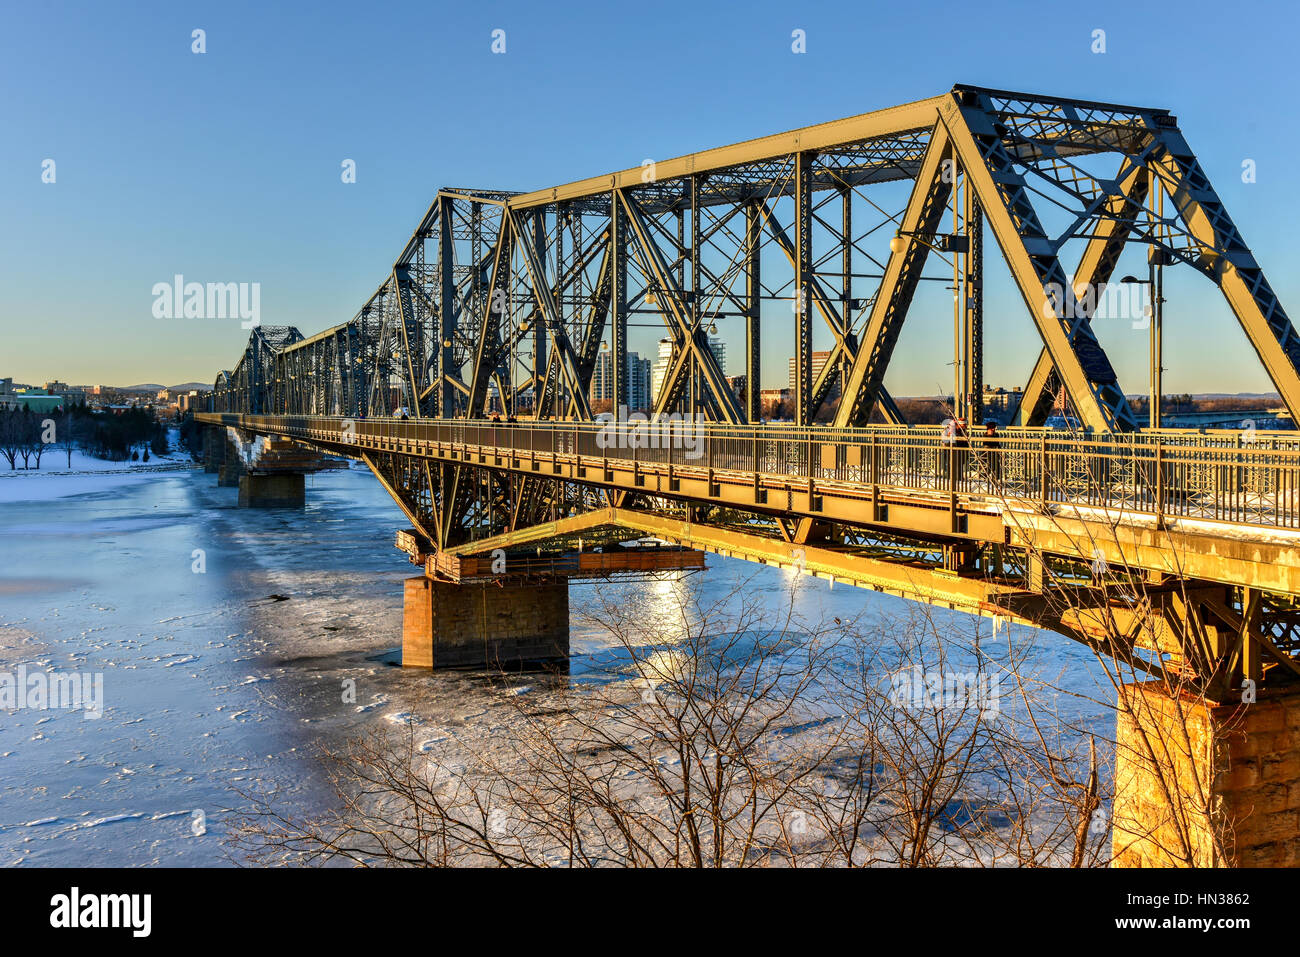 Alexandra Bridge Quebec High Resolution Stock Photography and Images - Alamy